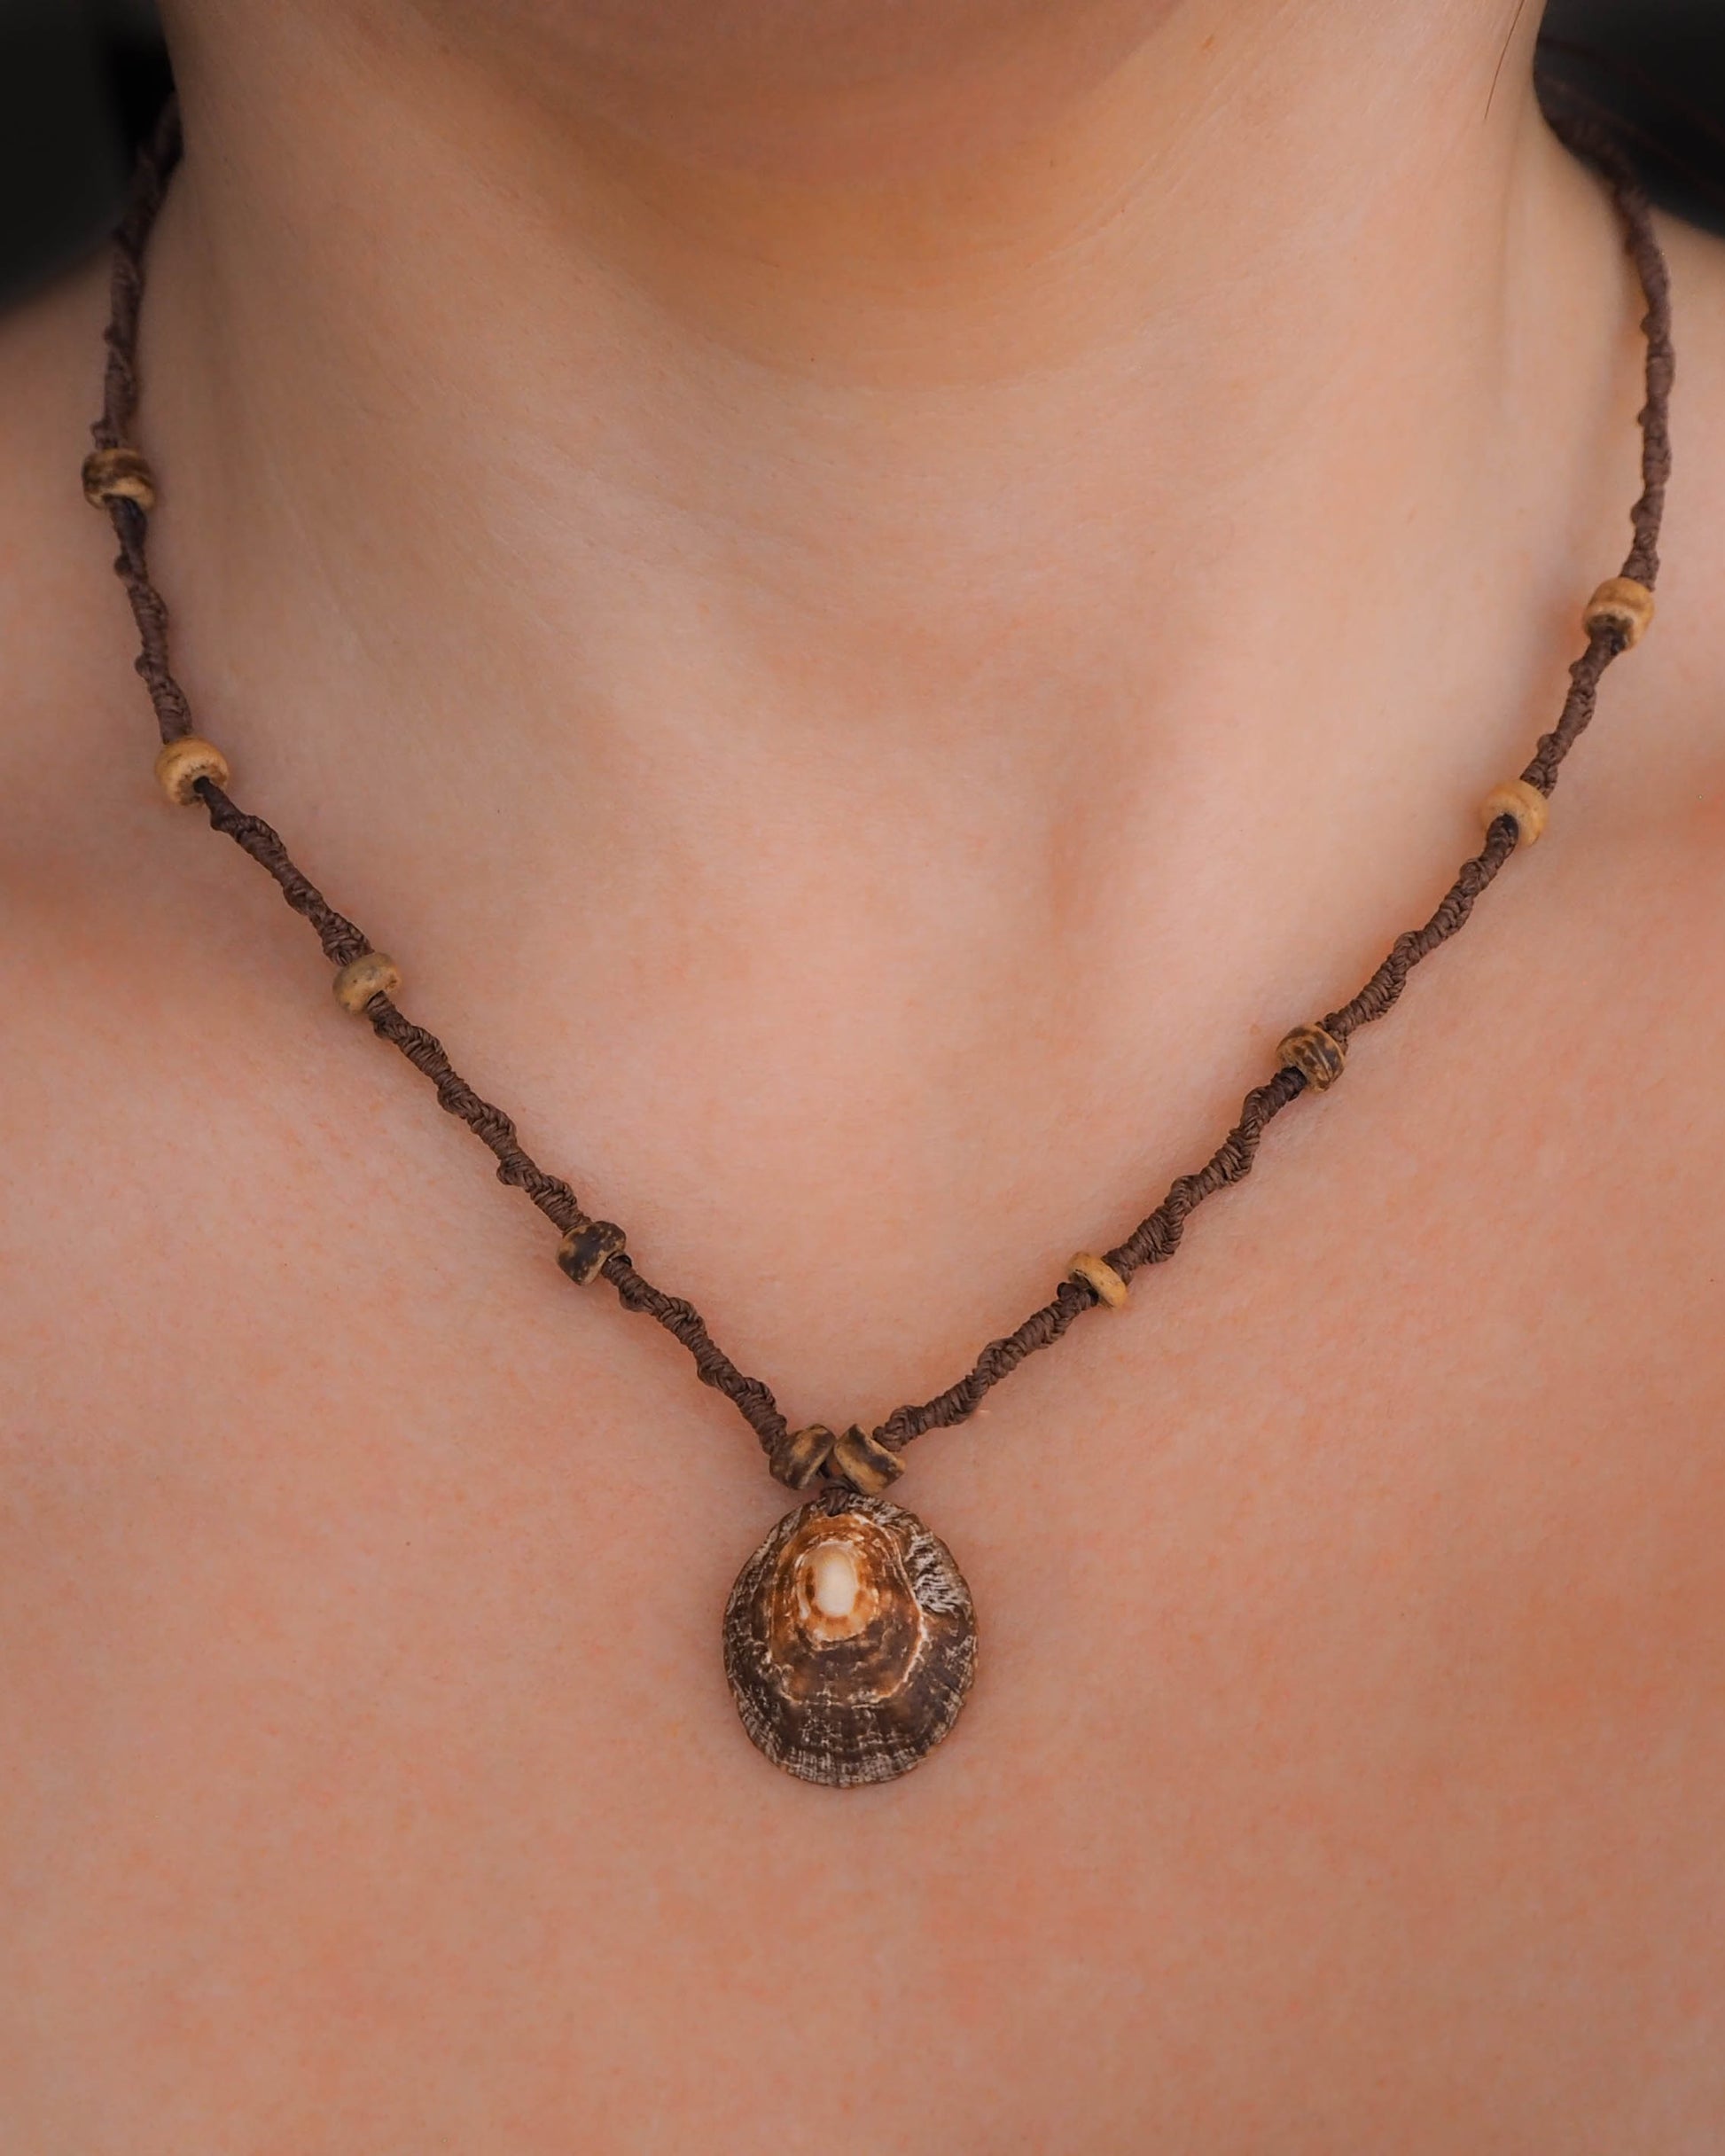 close-up photo of the necklace's centerpiece: a shimmering limpet shell pendant, delicately suspended from a braided brown wax cord. Wooden beads are interspersed along the cord, adding a touch of rustic charm.